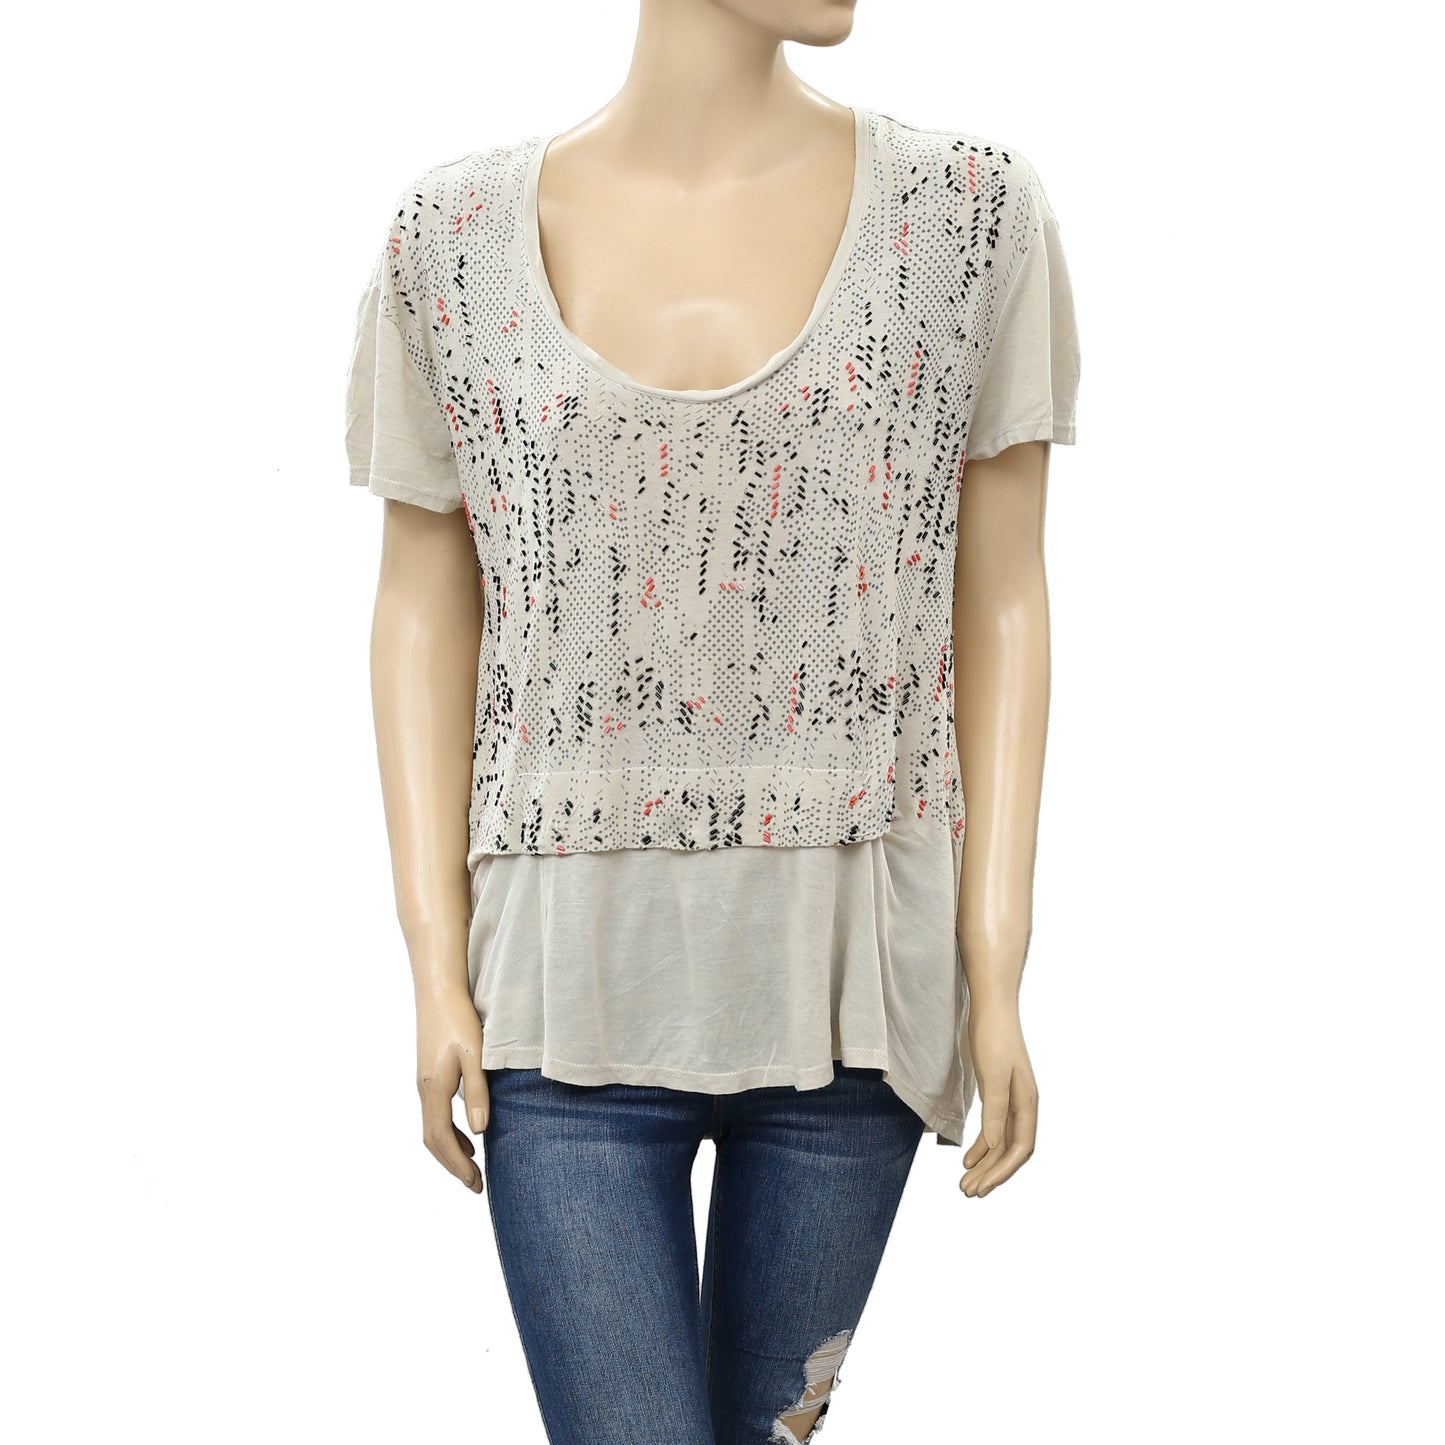 Silence + Noise Urban Outfitters Beaded Embellished Tunic Top L